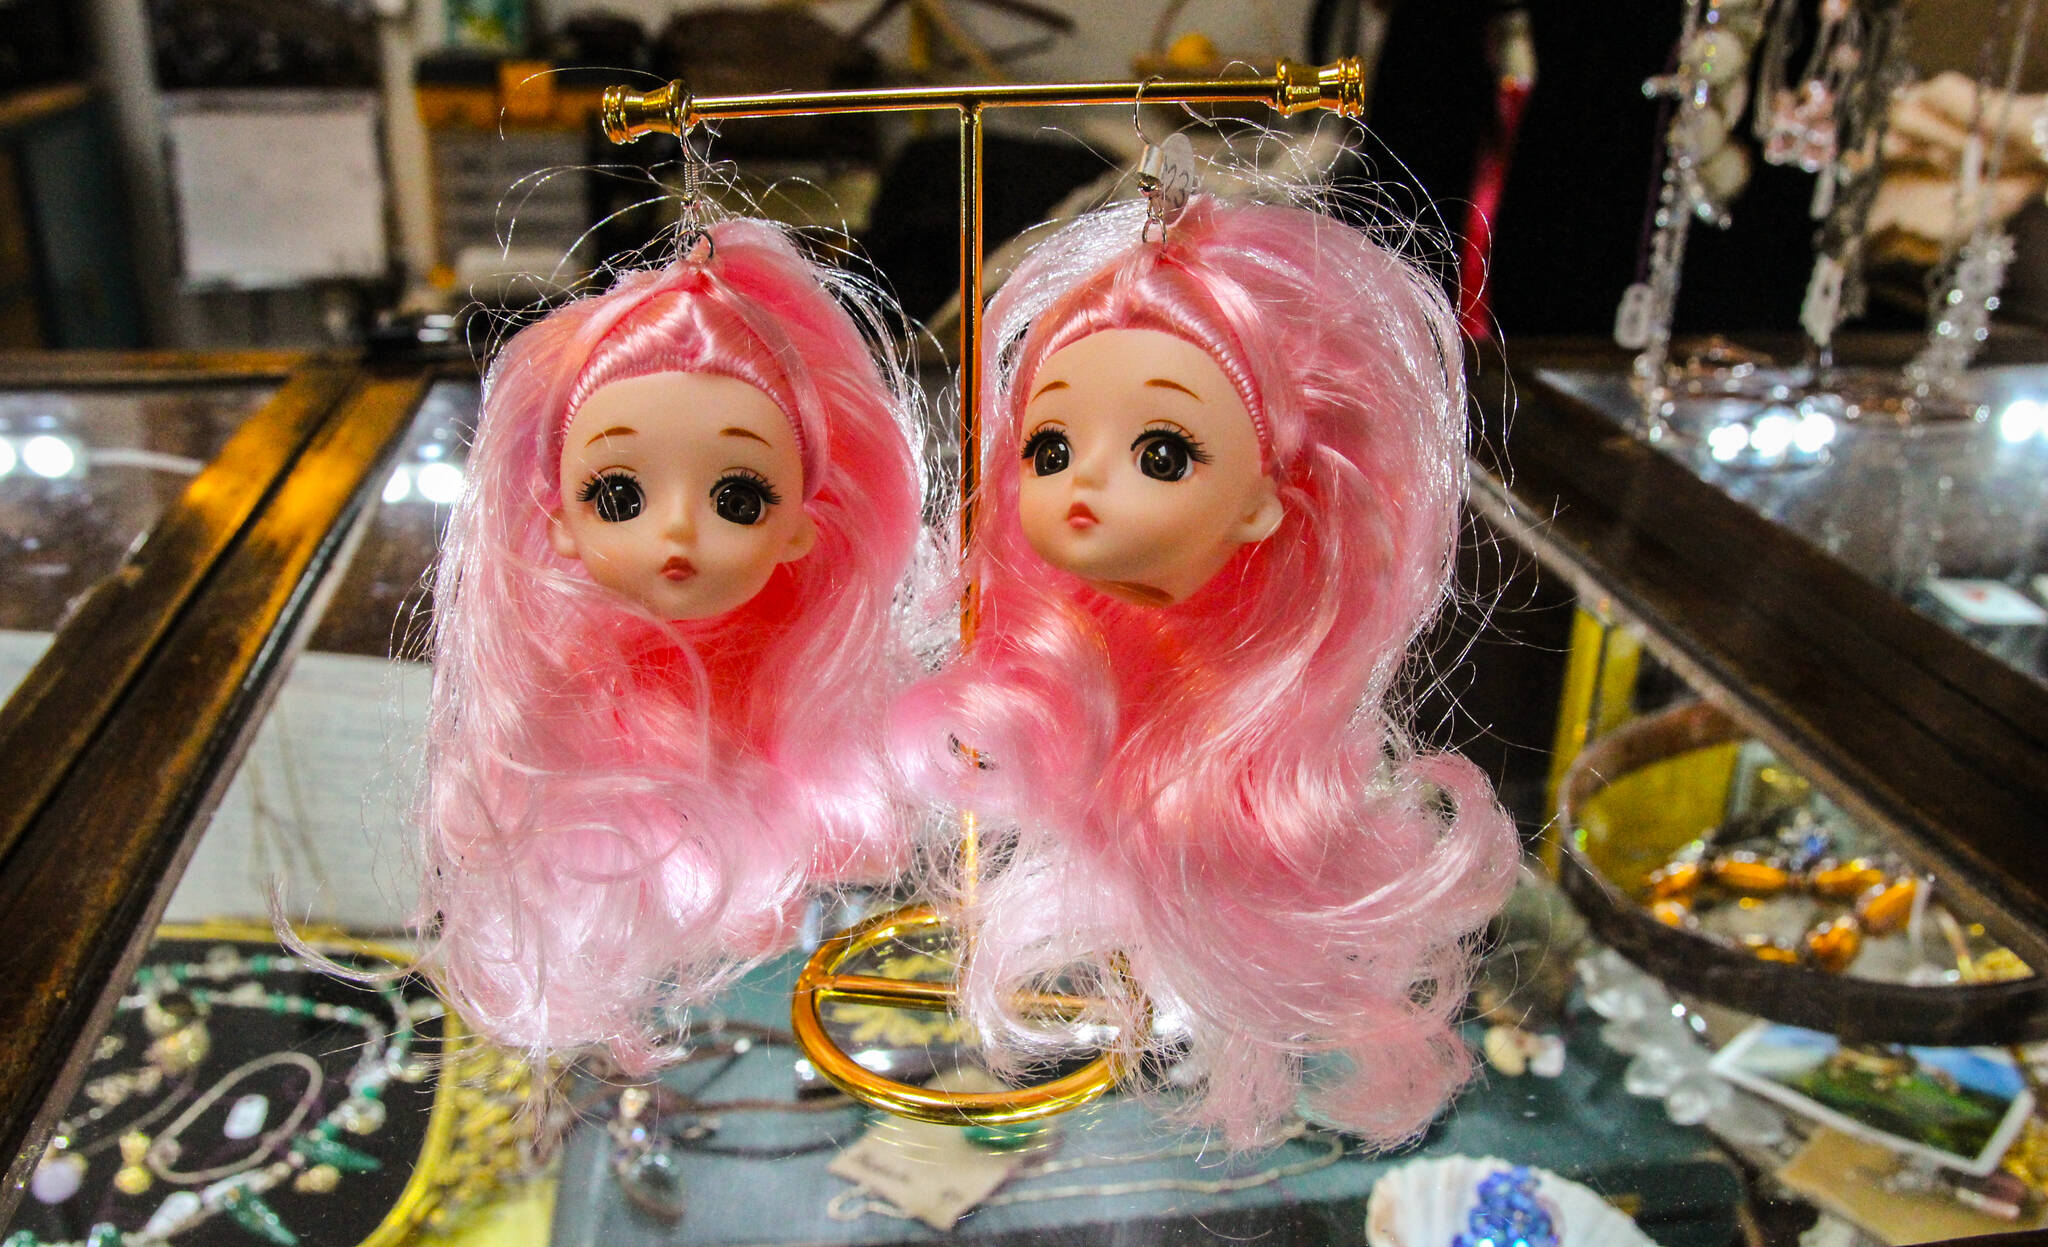 These doll earrings, sold at Dina’s Great Finds, can conquer the heart of any maximalist fashionista. (Photo by Luisa Loi)